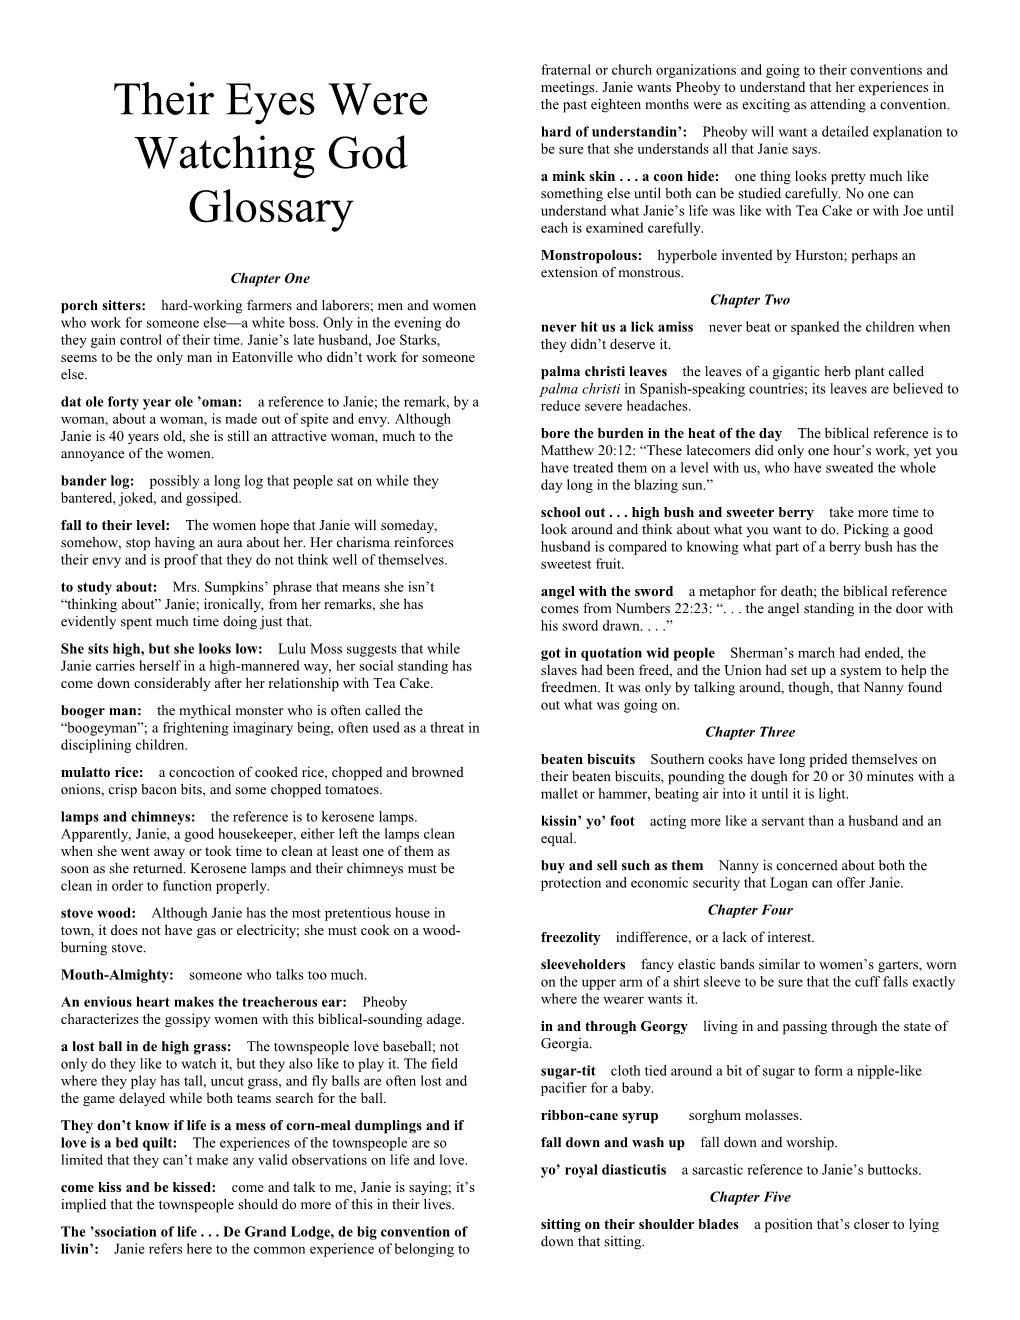 Their Eyes Were Watching God – Glossary